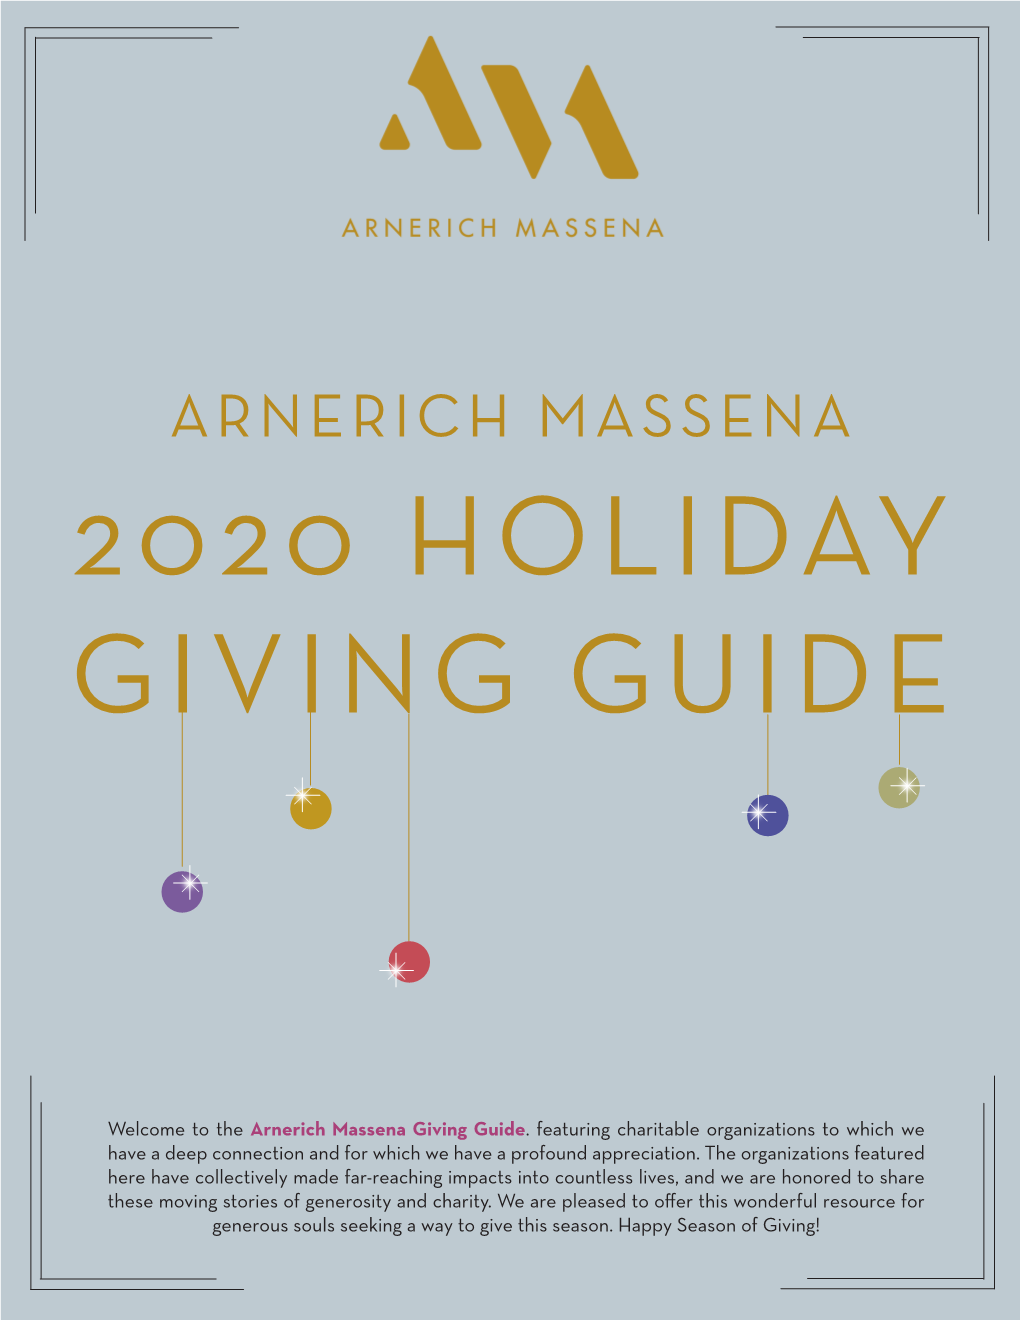 Download Arnerich Massena Giving Guide 2020 Here